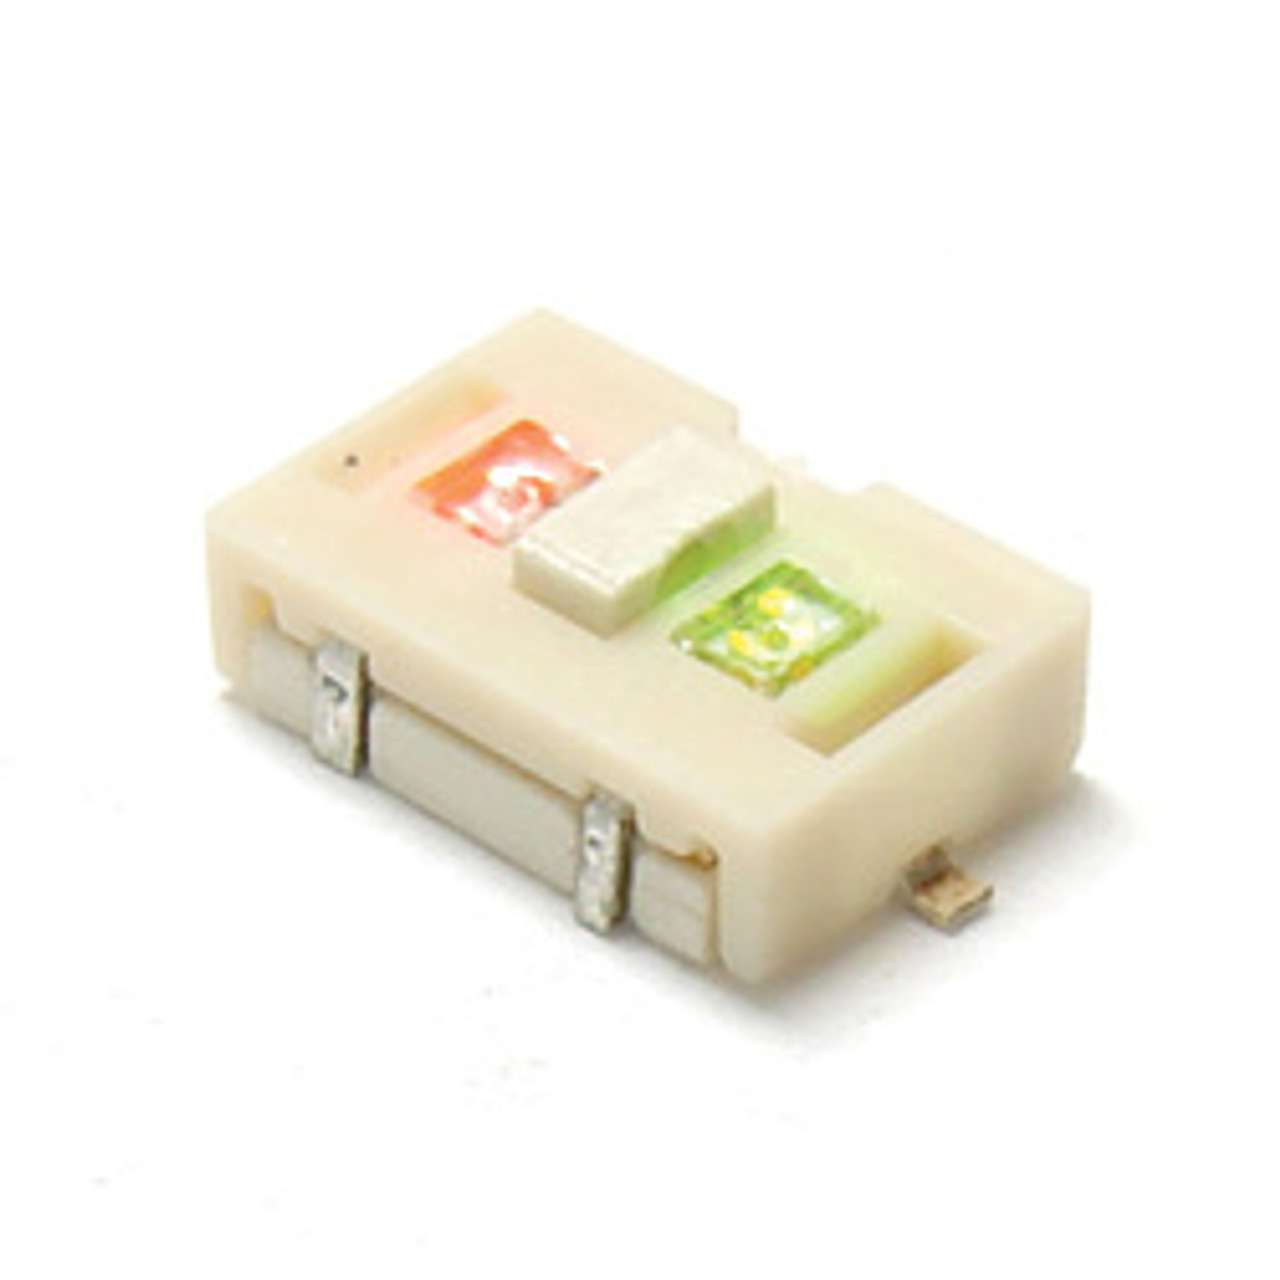 E-Switch TL-3200-A-F160-R-Y-R Tactile Switches